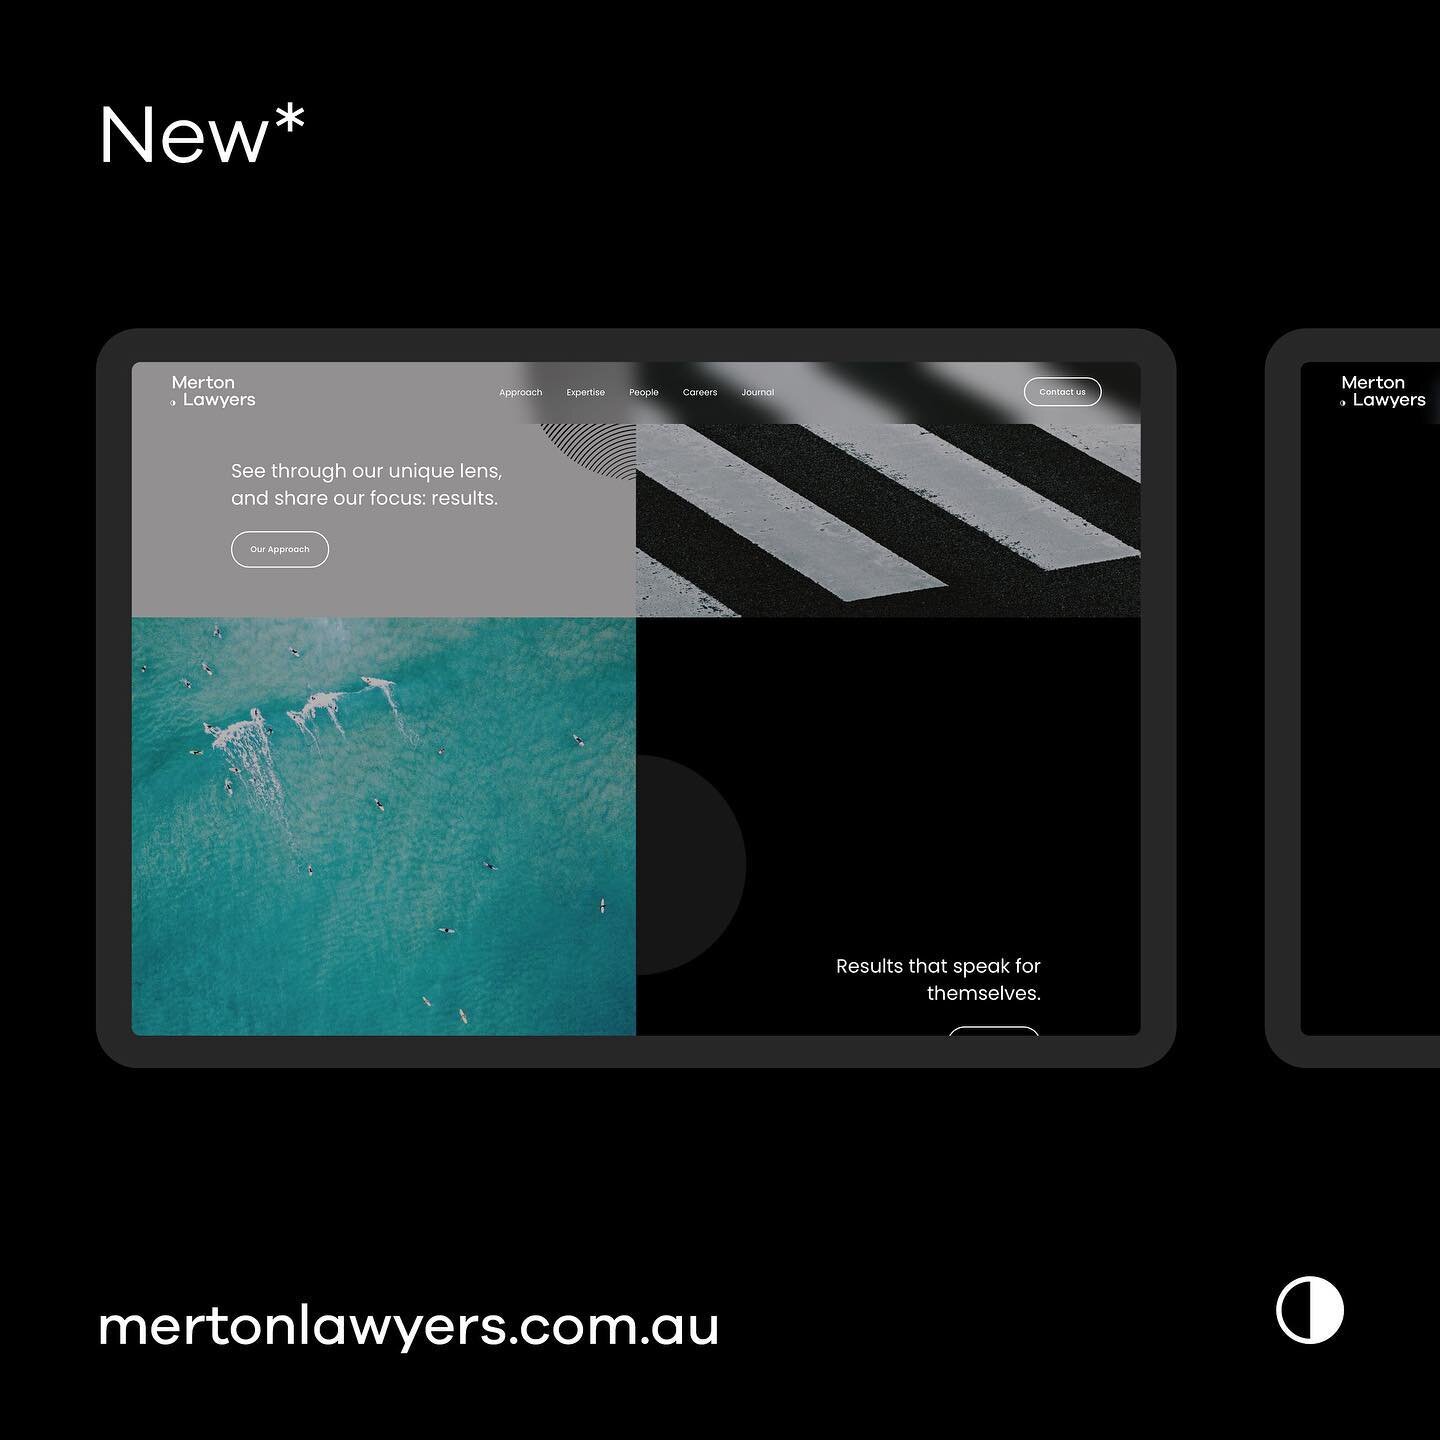 We have a new look, new purpose and a new home. Explore mertonlawyers.com.au and discover more about what makes a Merton Lawyer.